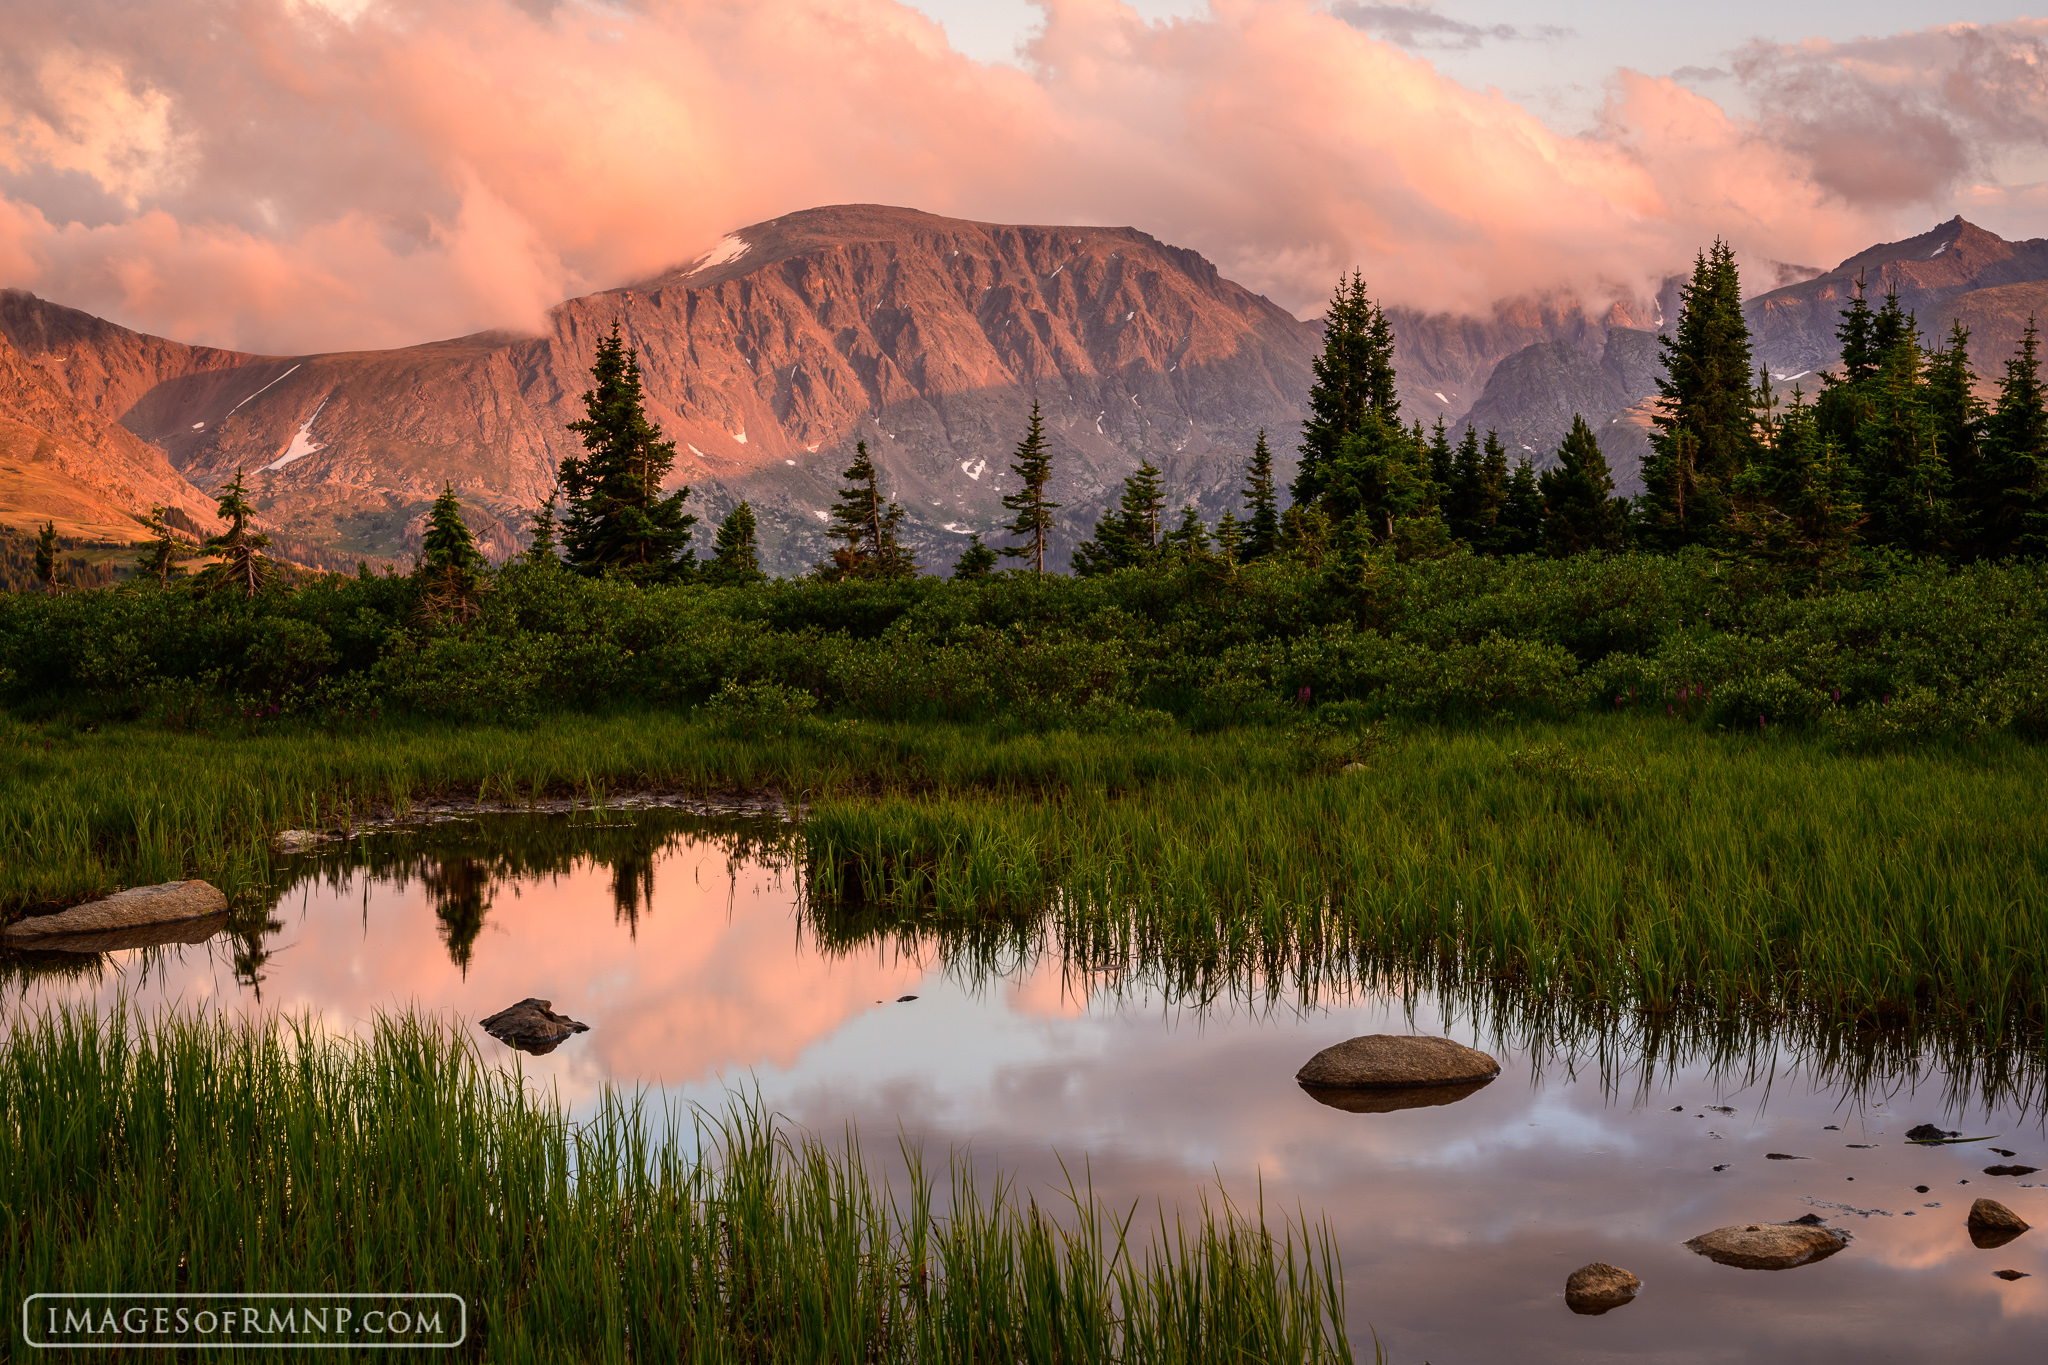 On a quiet evening deep in the backcountry of Rocky Mountain National Park a peaceful stillness prevailed. There was barely a...